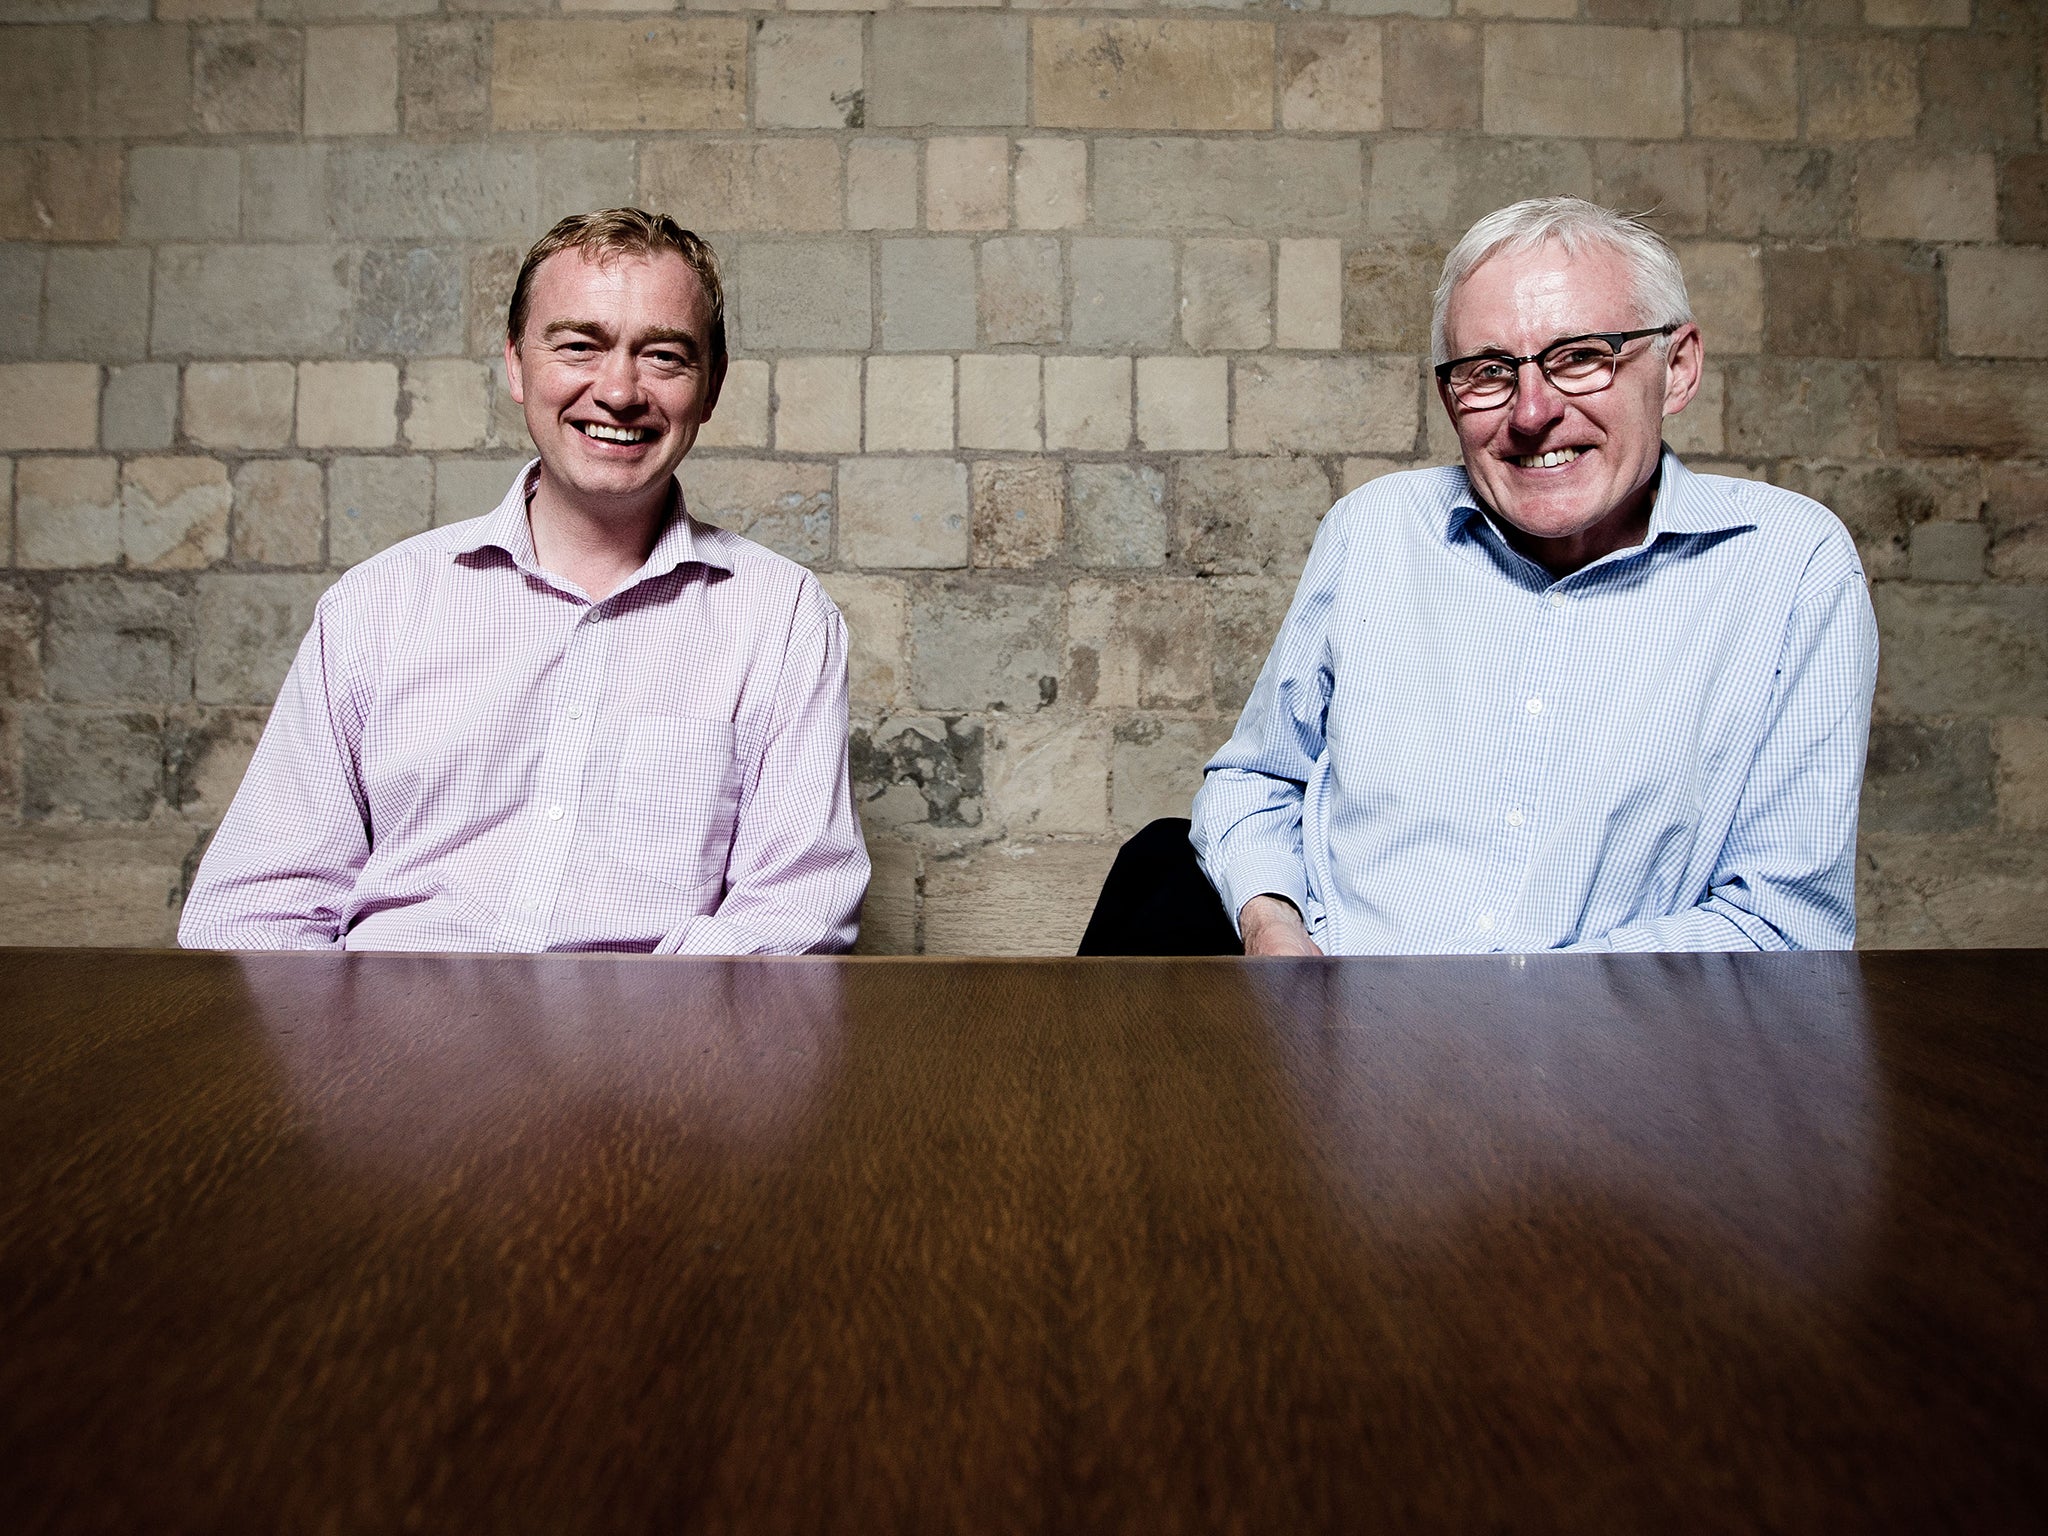 Tim Farron, left, and Norman Lamb at the IoS hustings